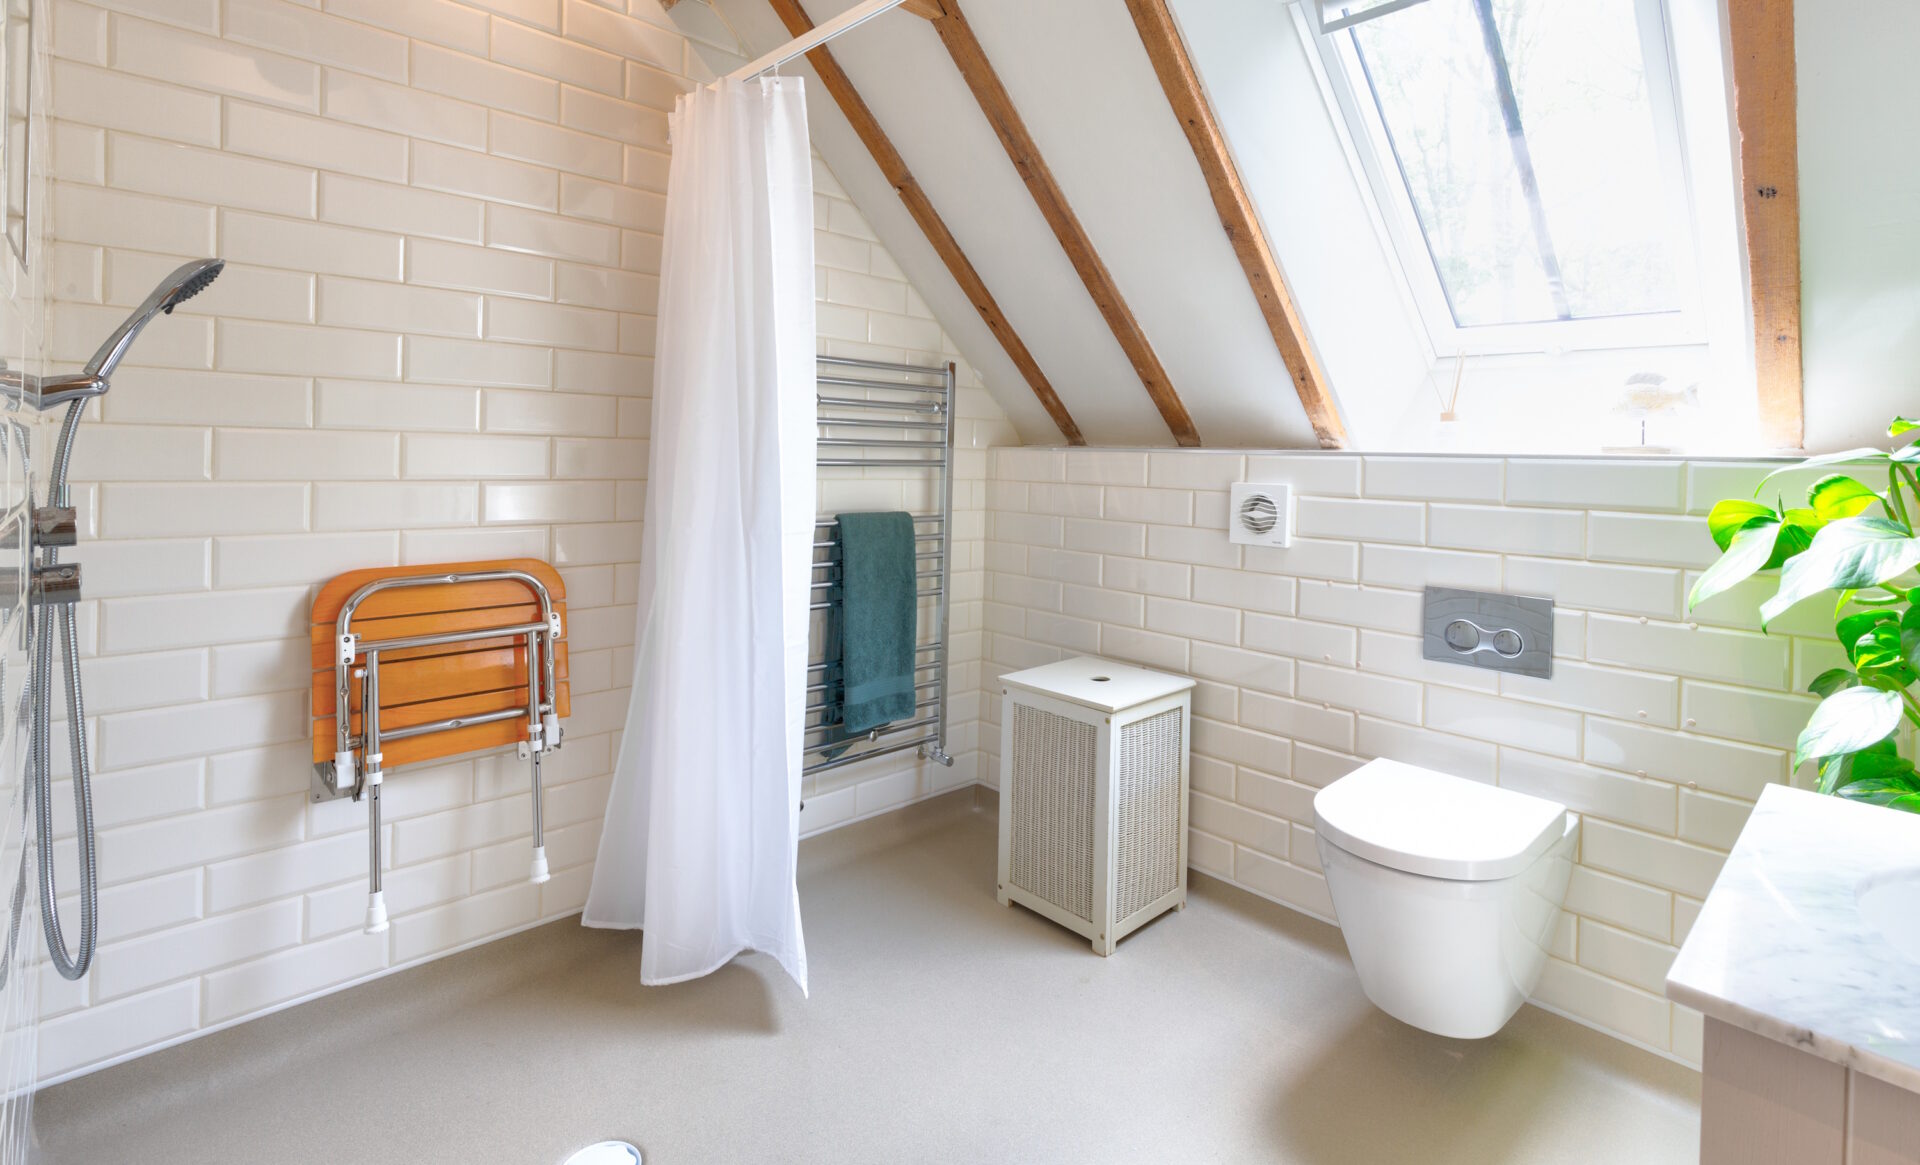 Photo of accessible wet room sensitively designed and installed in a beautiful barn conversion